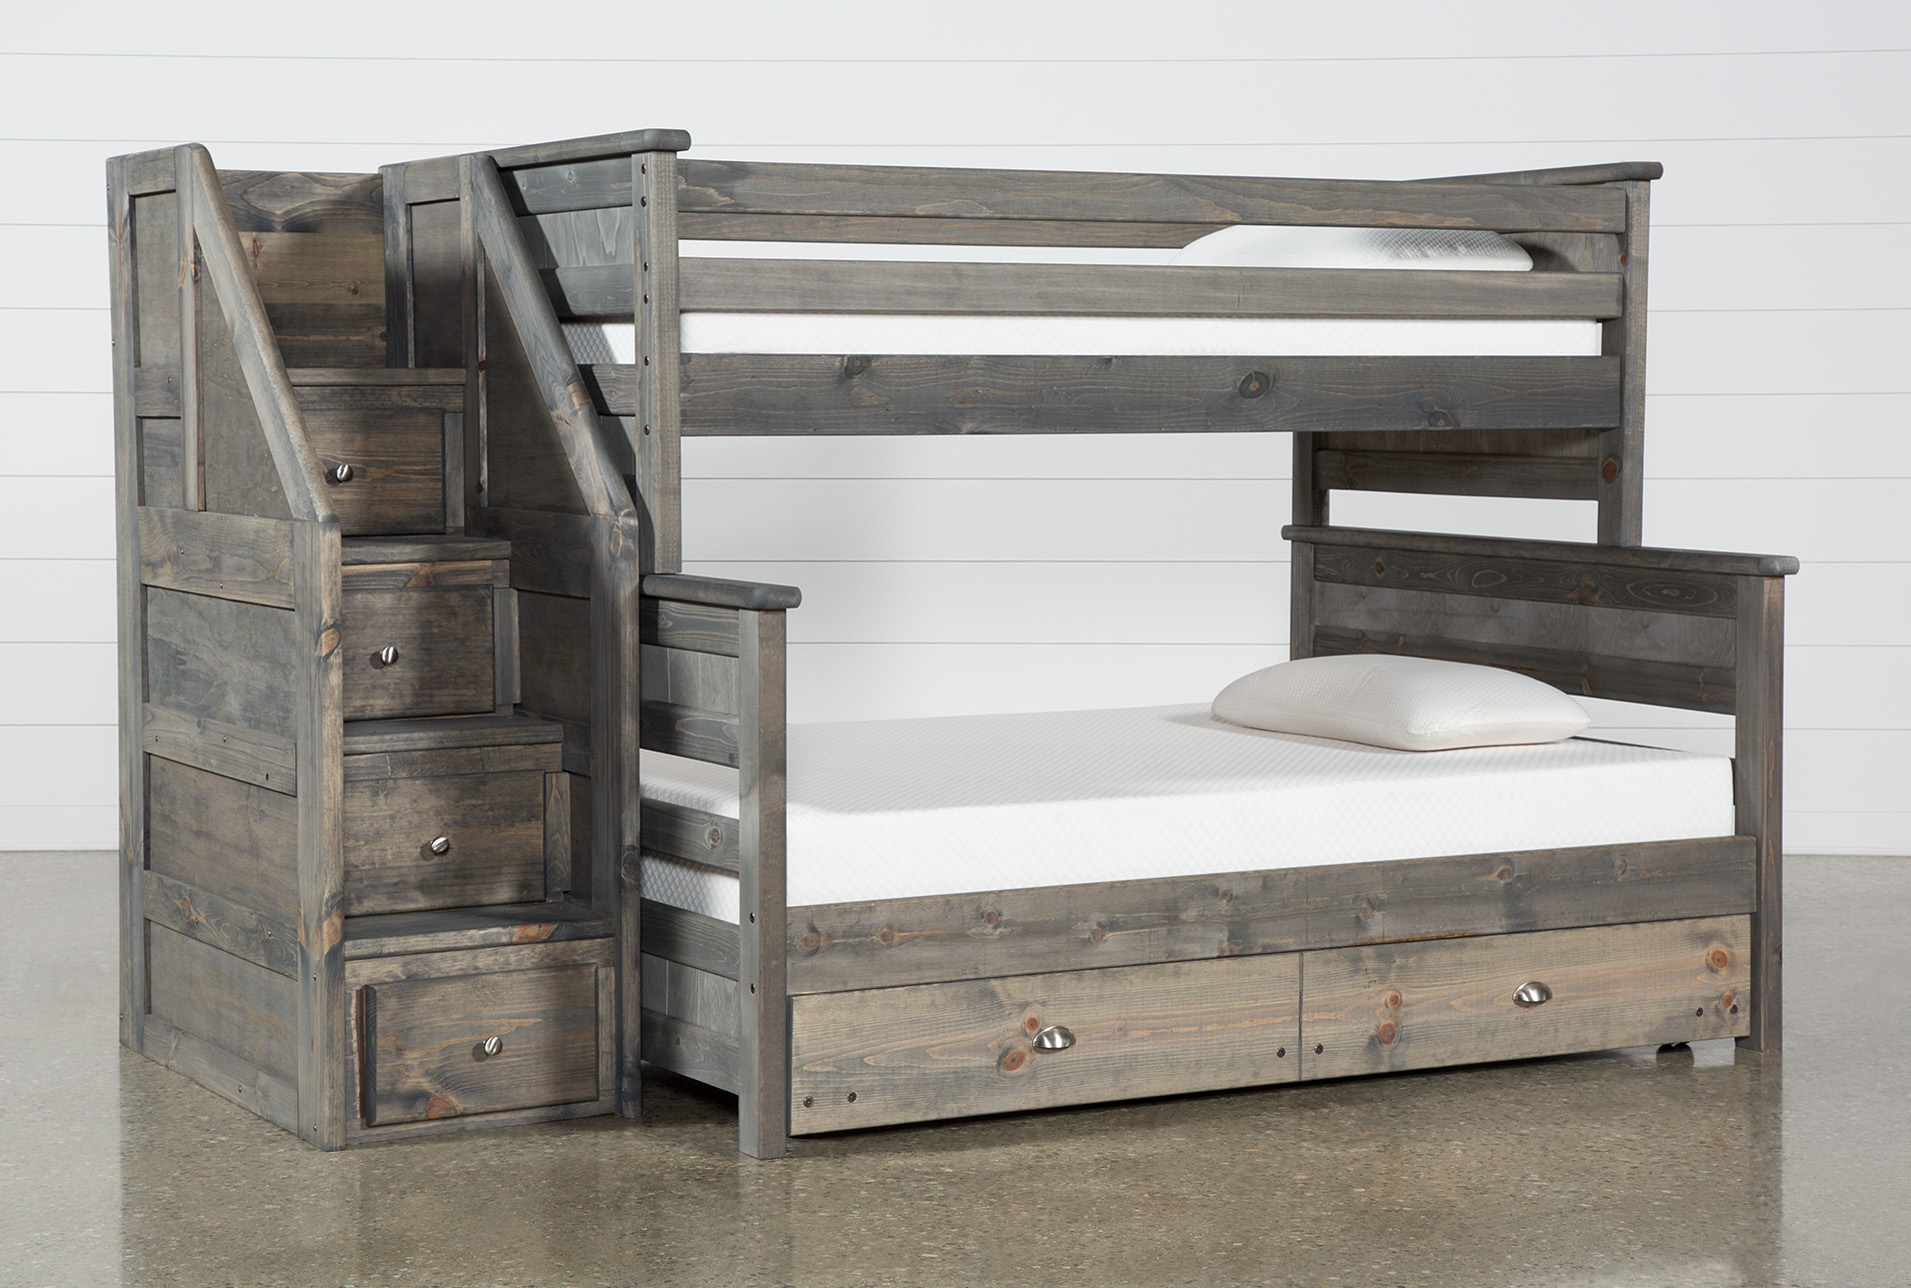 bunk bed with daybed underneath